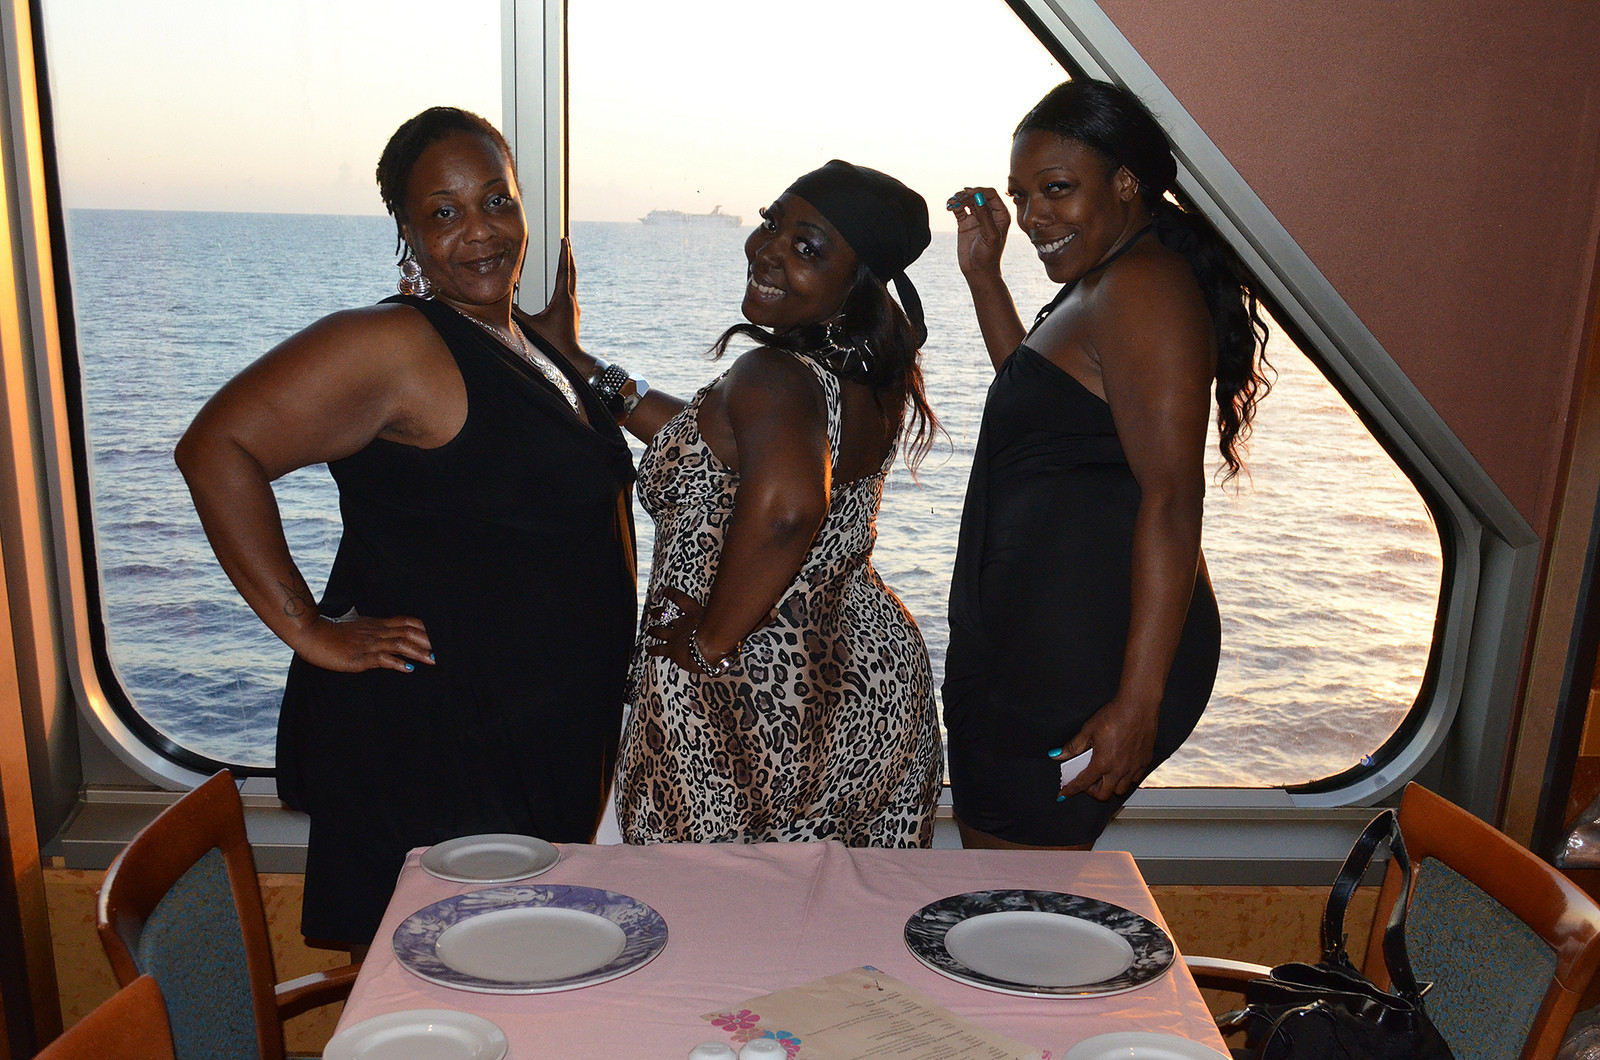 Dress Code For Dining Room On Carnival Cruise